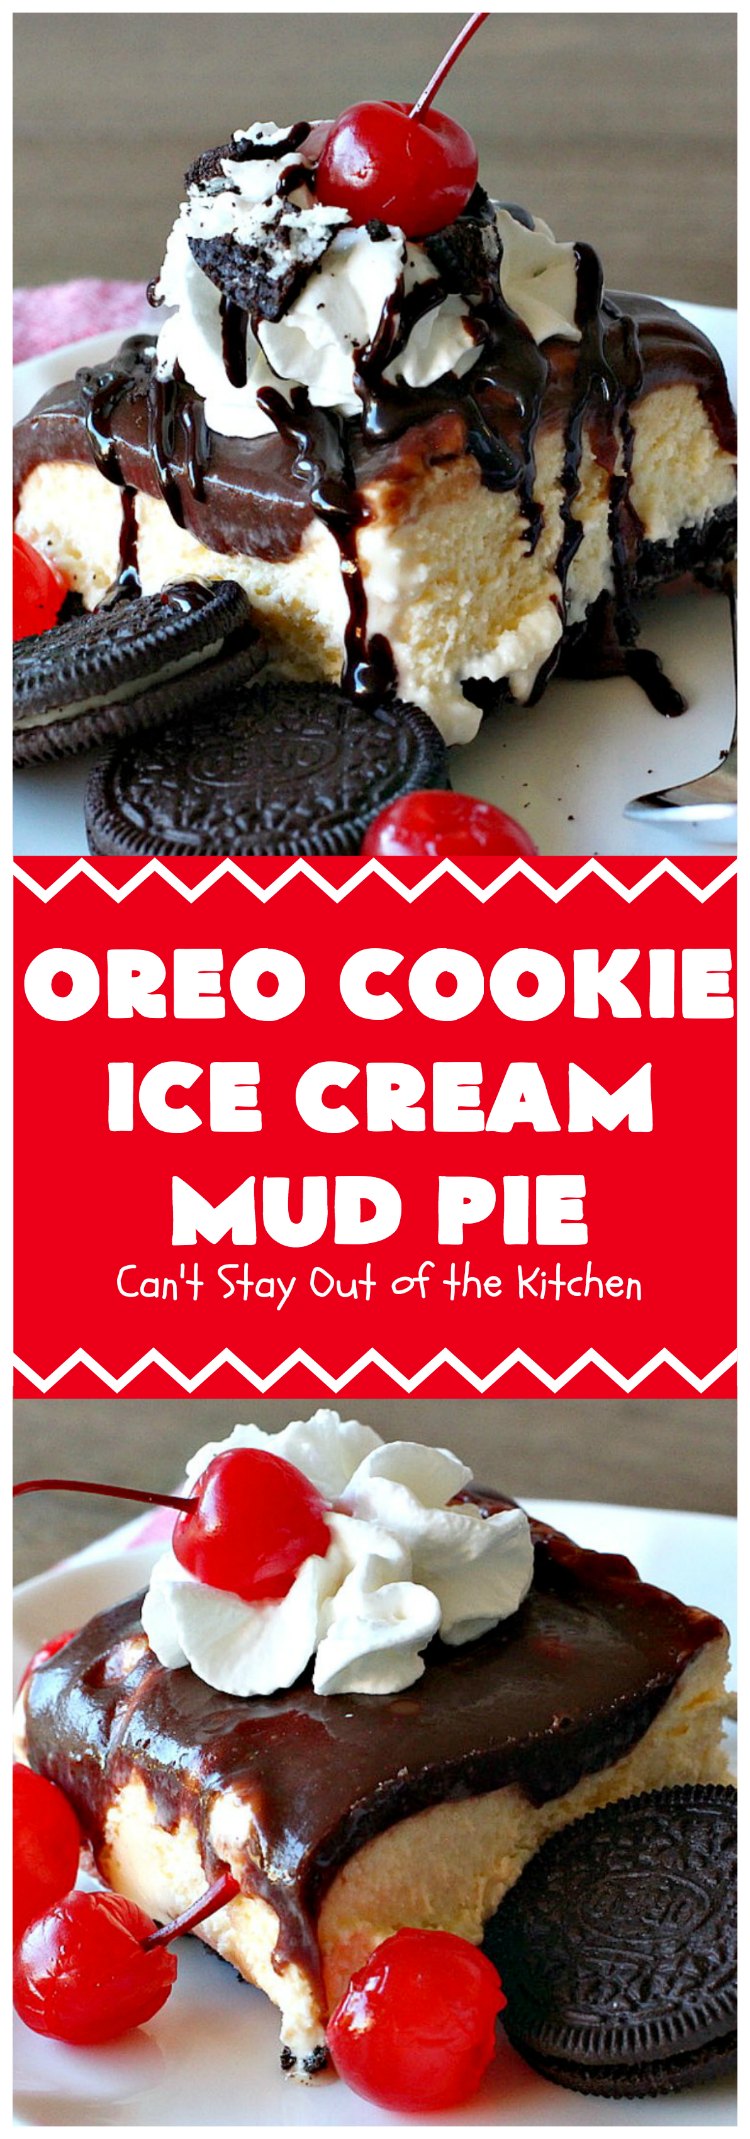 Oreo Cookie Ice Cream Mud Pie | Can't Stay Out of the Kitchen